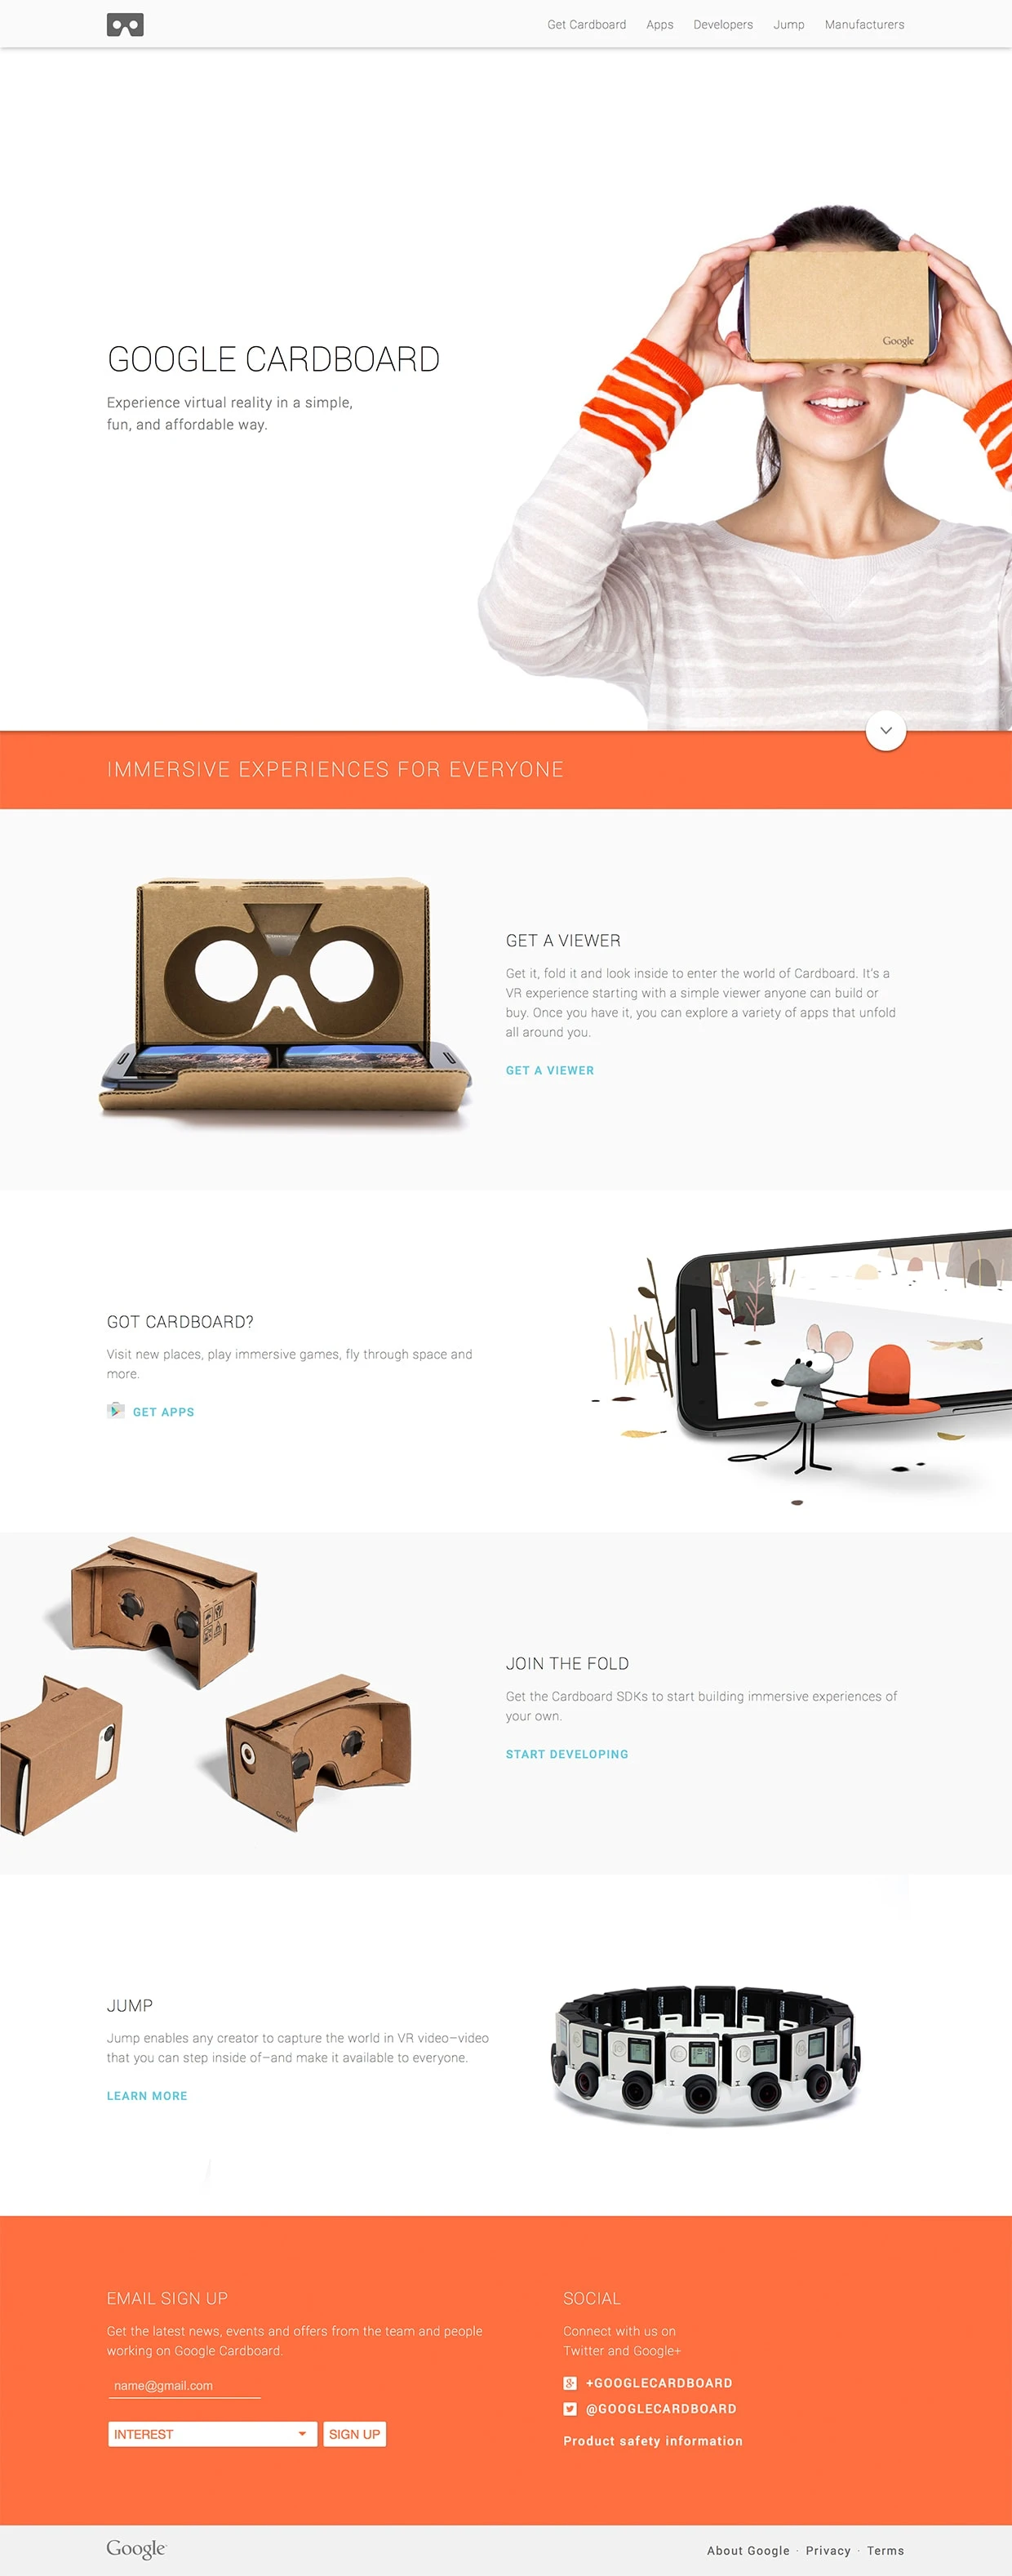 Google Cardboard Landing Page Example: Turn your smartphone into a virtual reality viewer that’s simple, fun, and affordable.